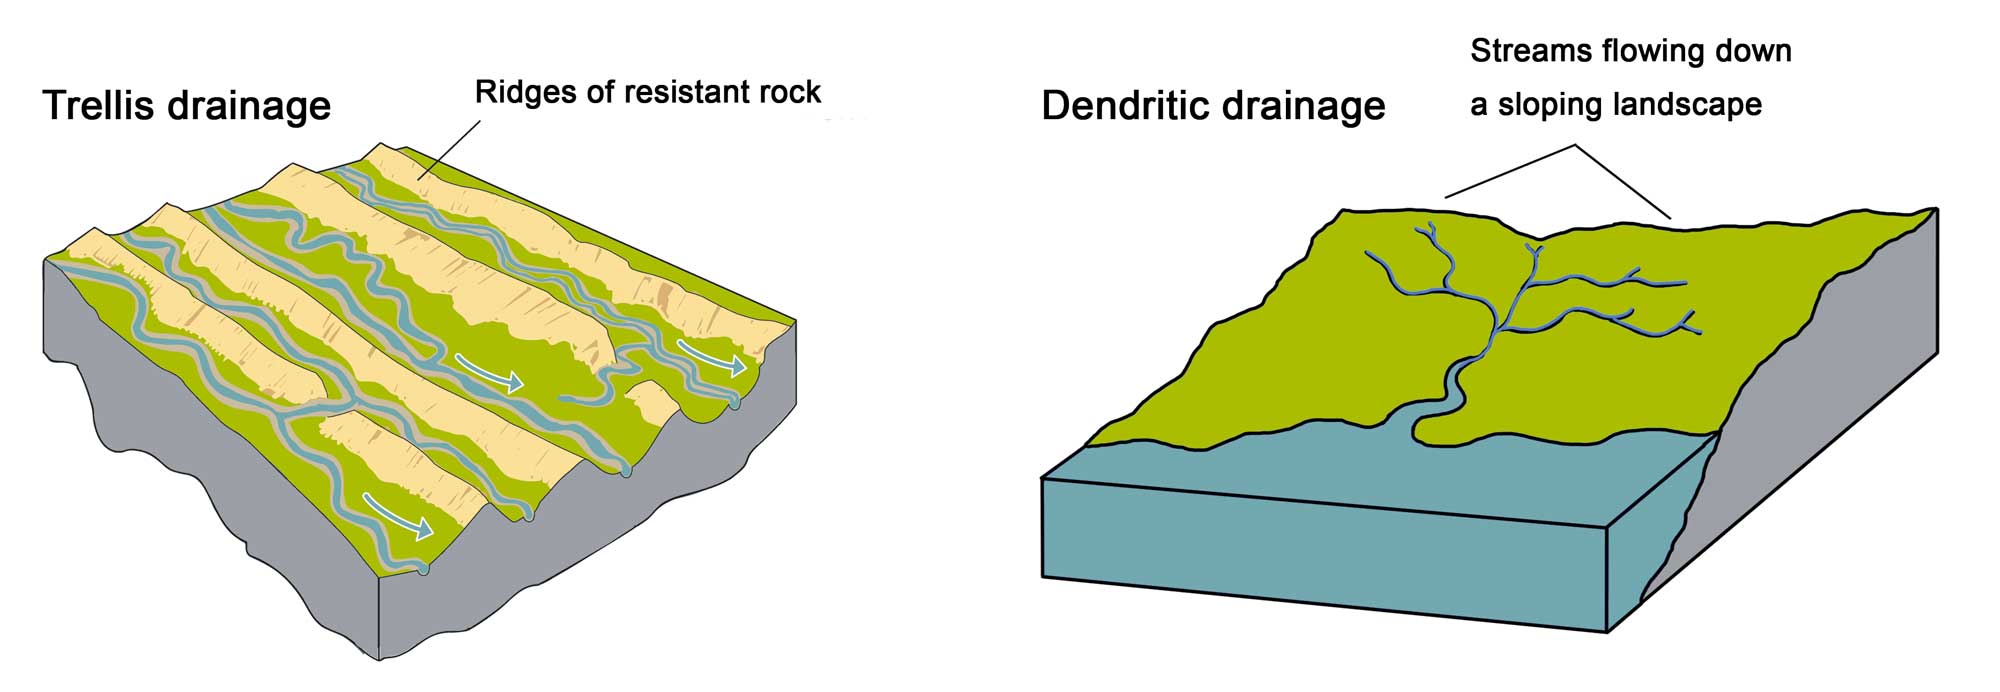 Image showing a comparison of trellis and dendritic drainage patterns.